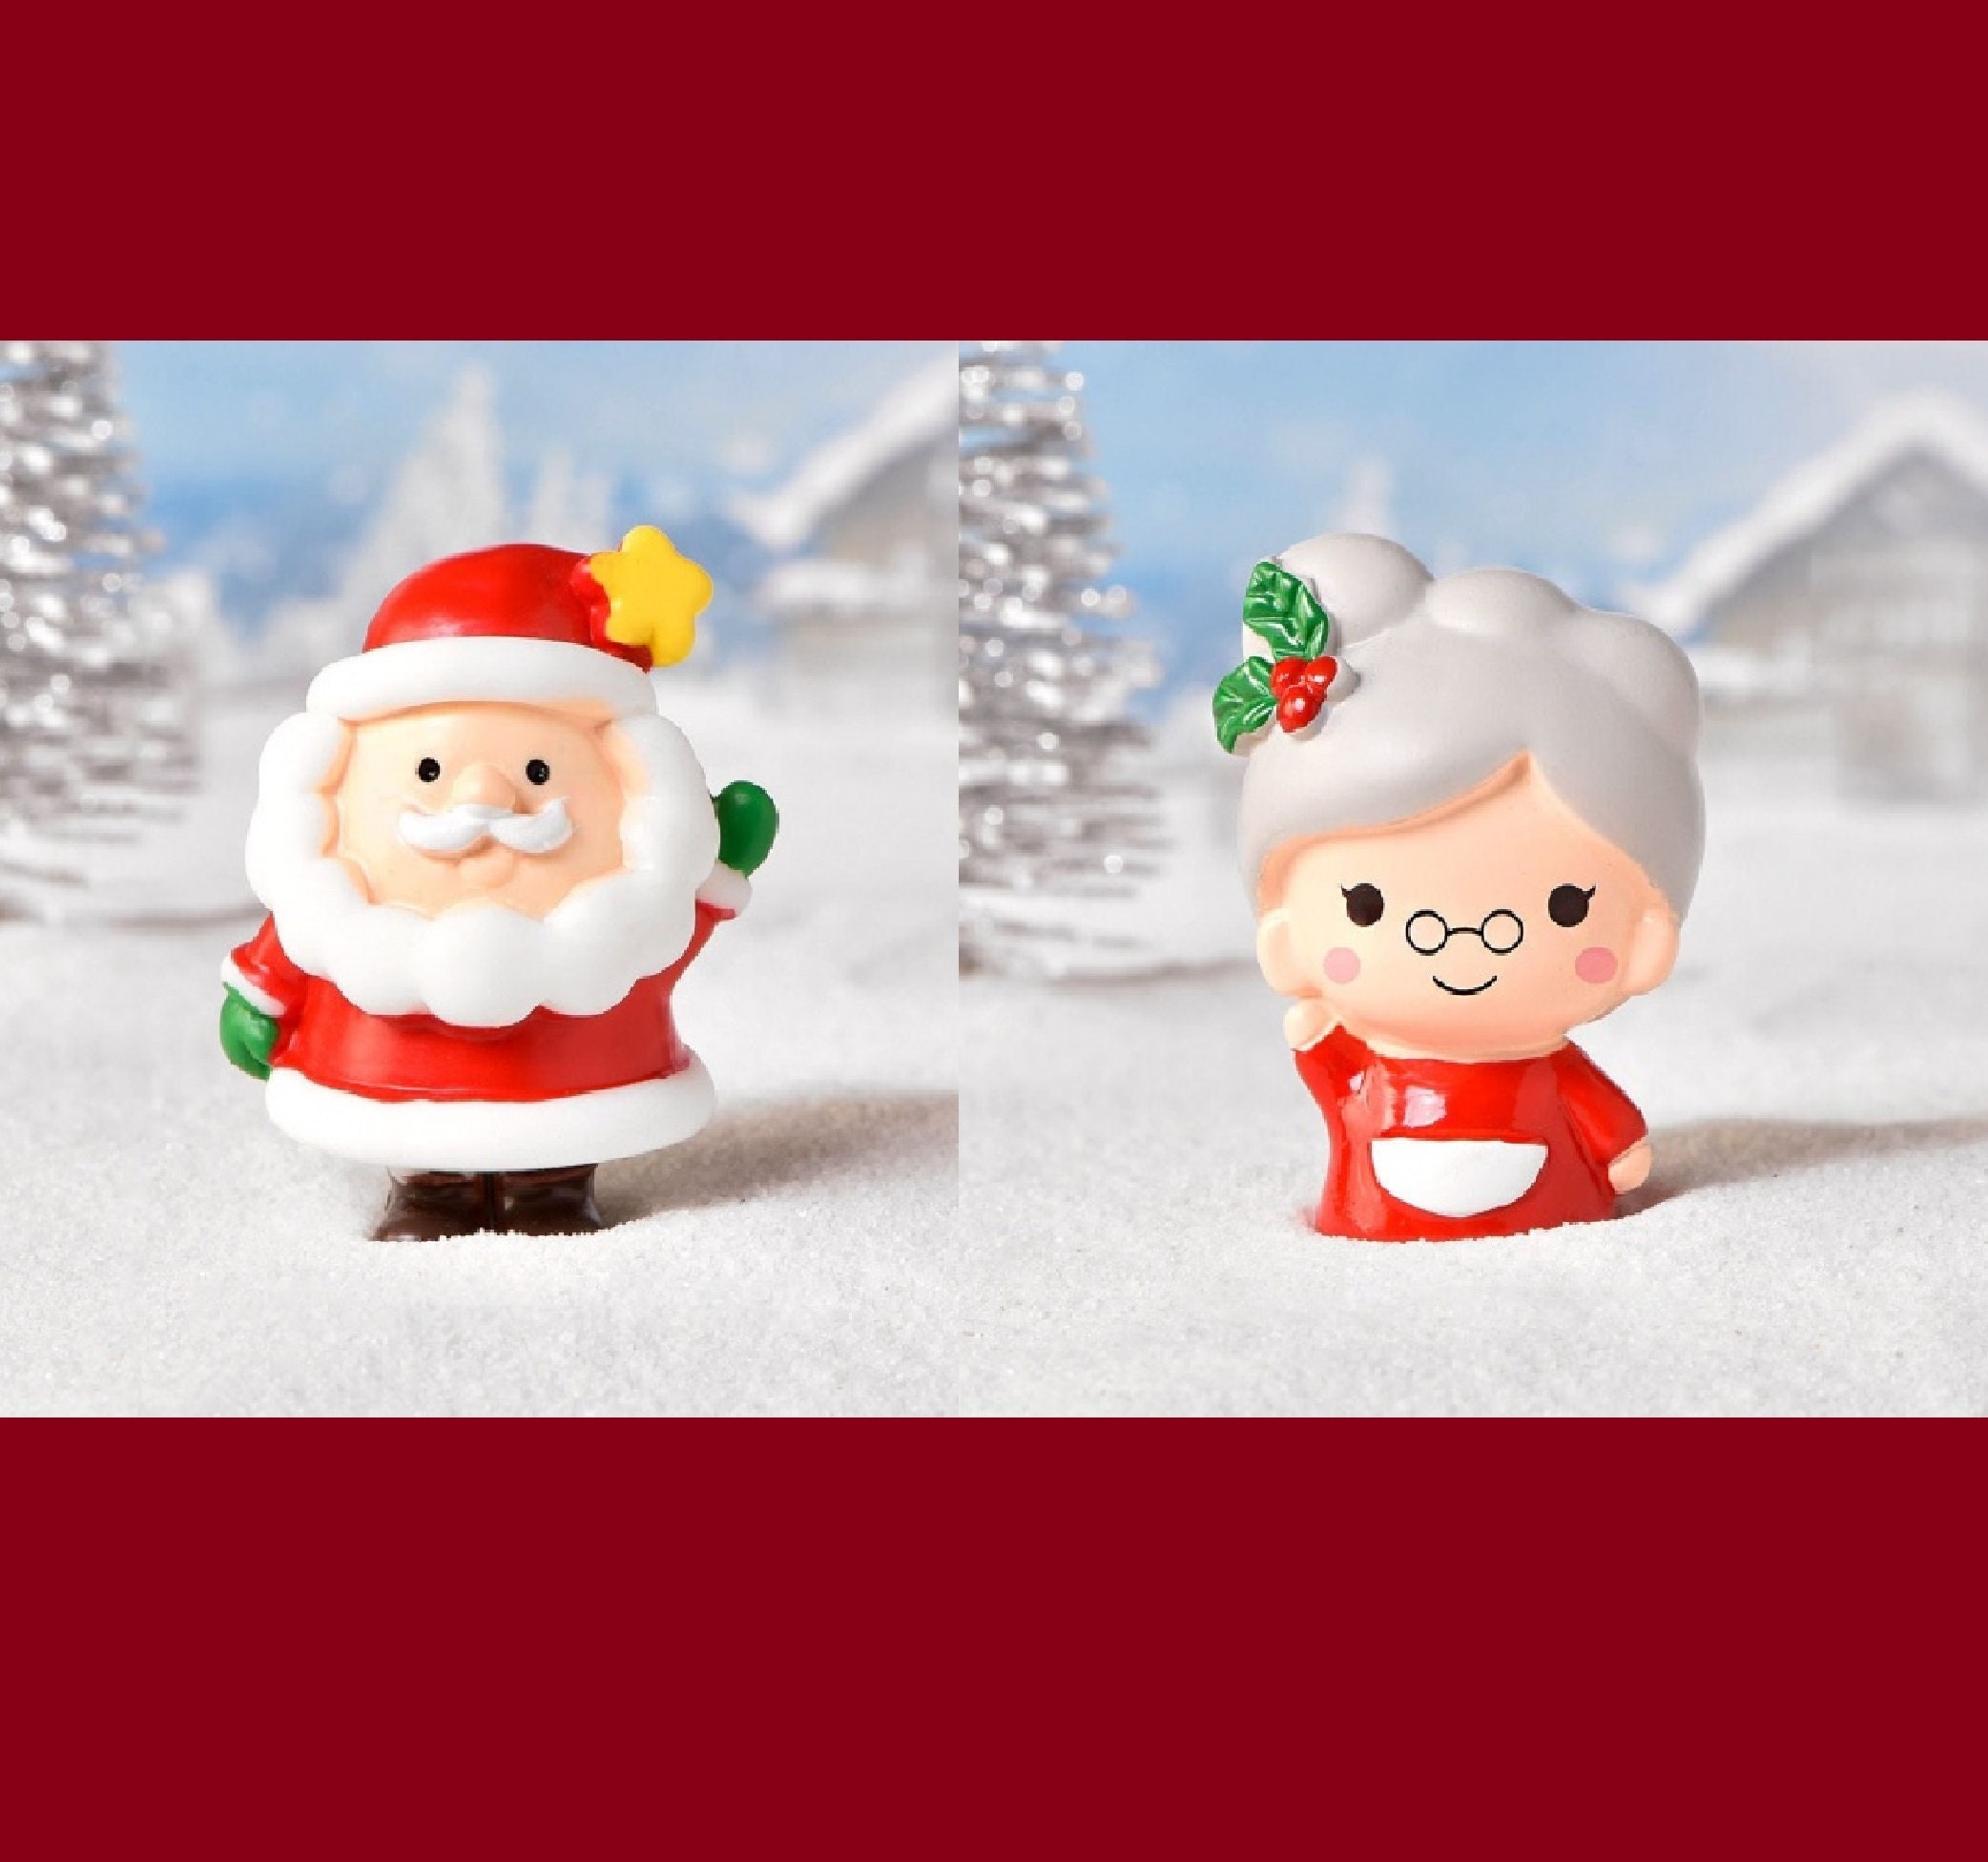 Santa and Mrs. Claus Miniature Christmas Figurines for - Etsy 日本